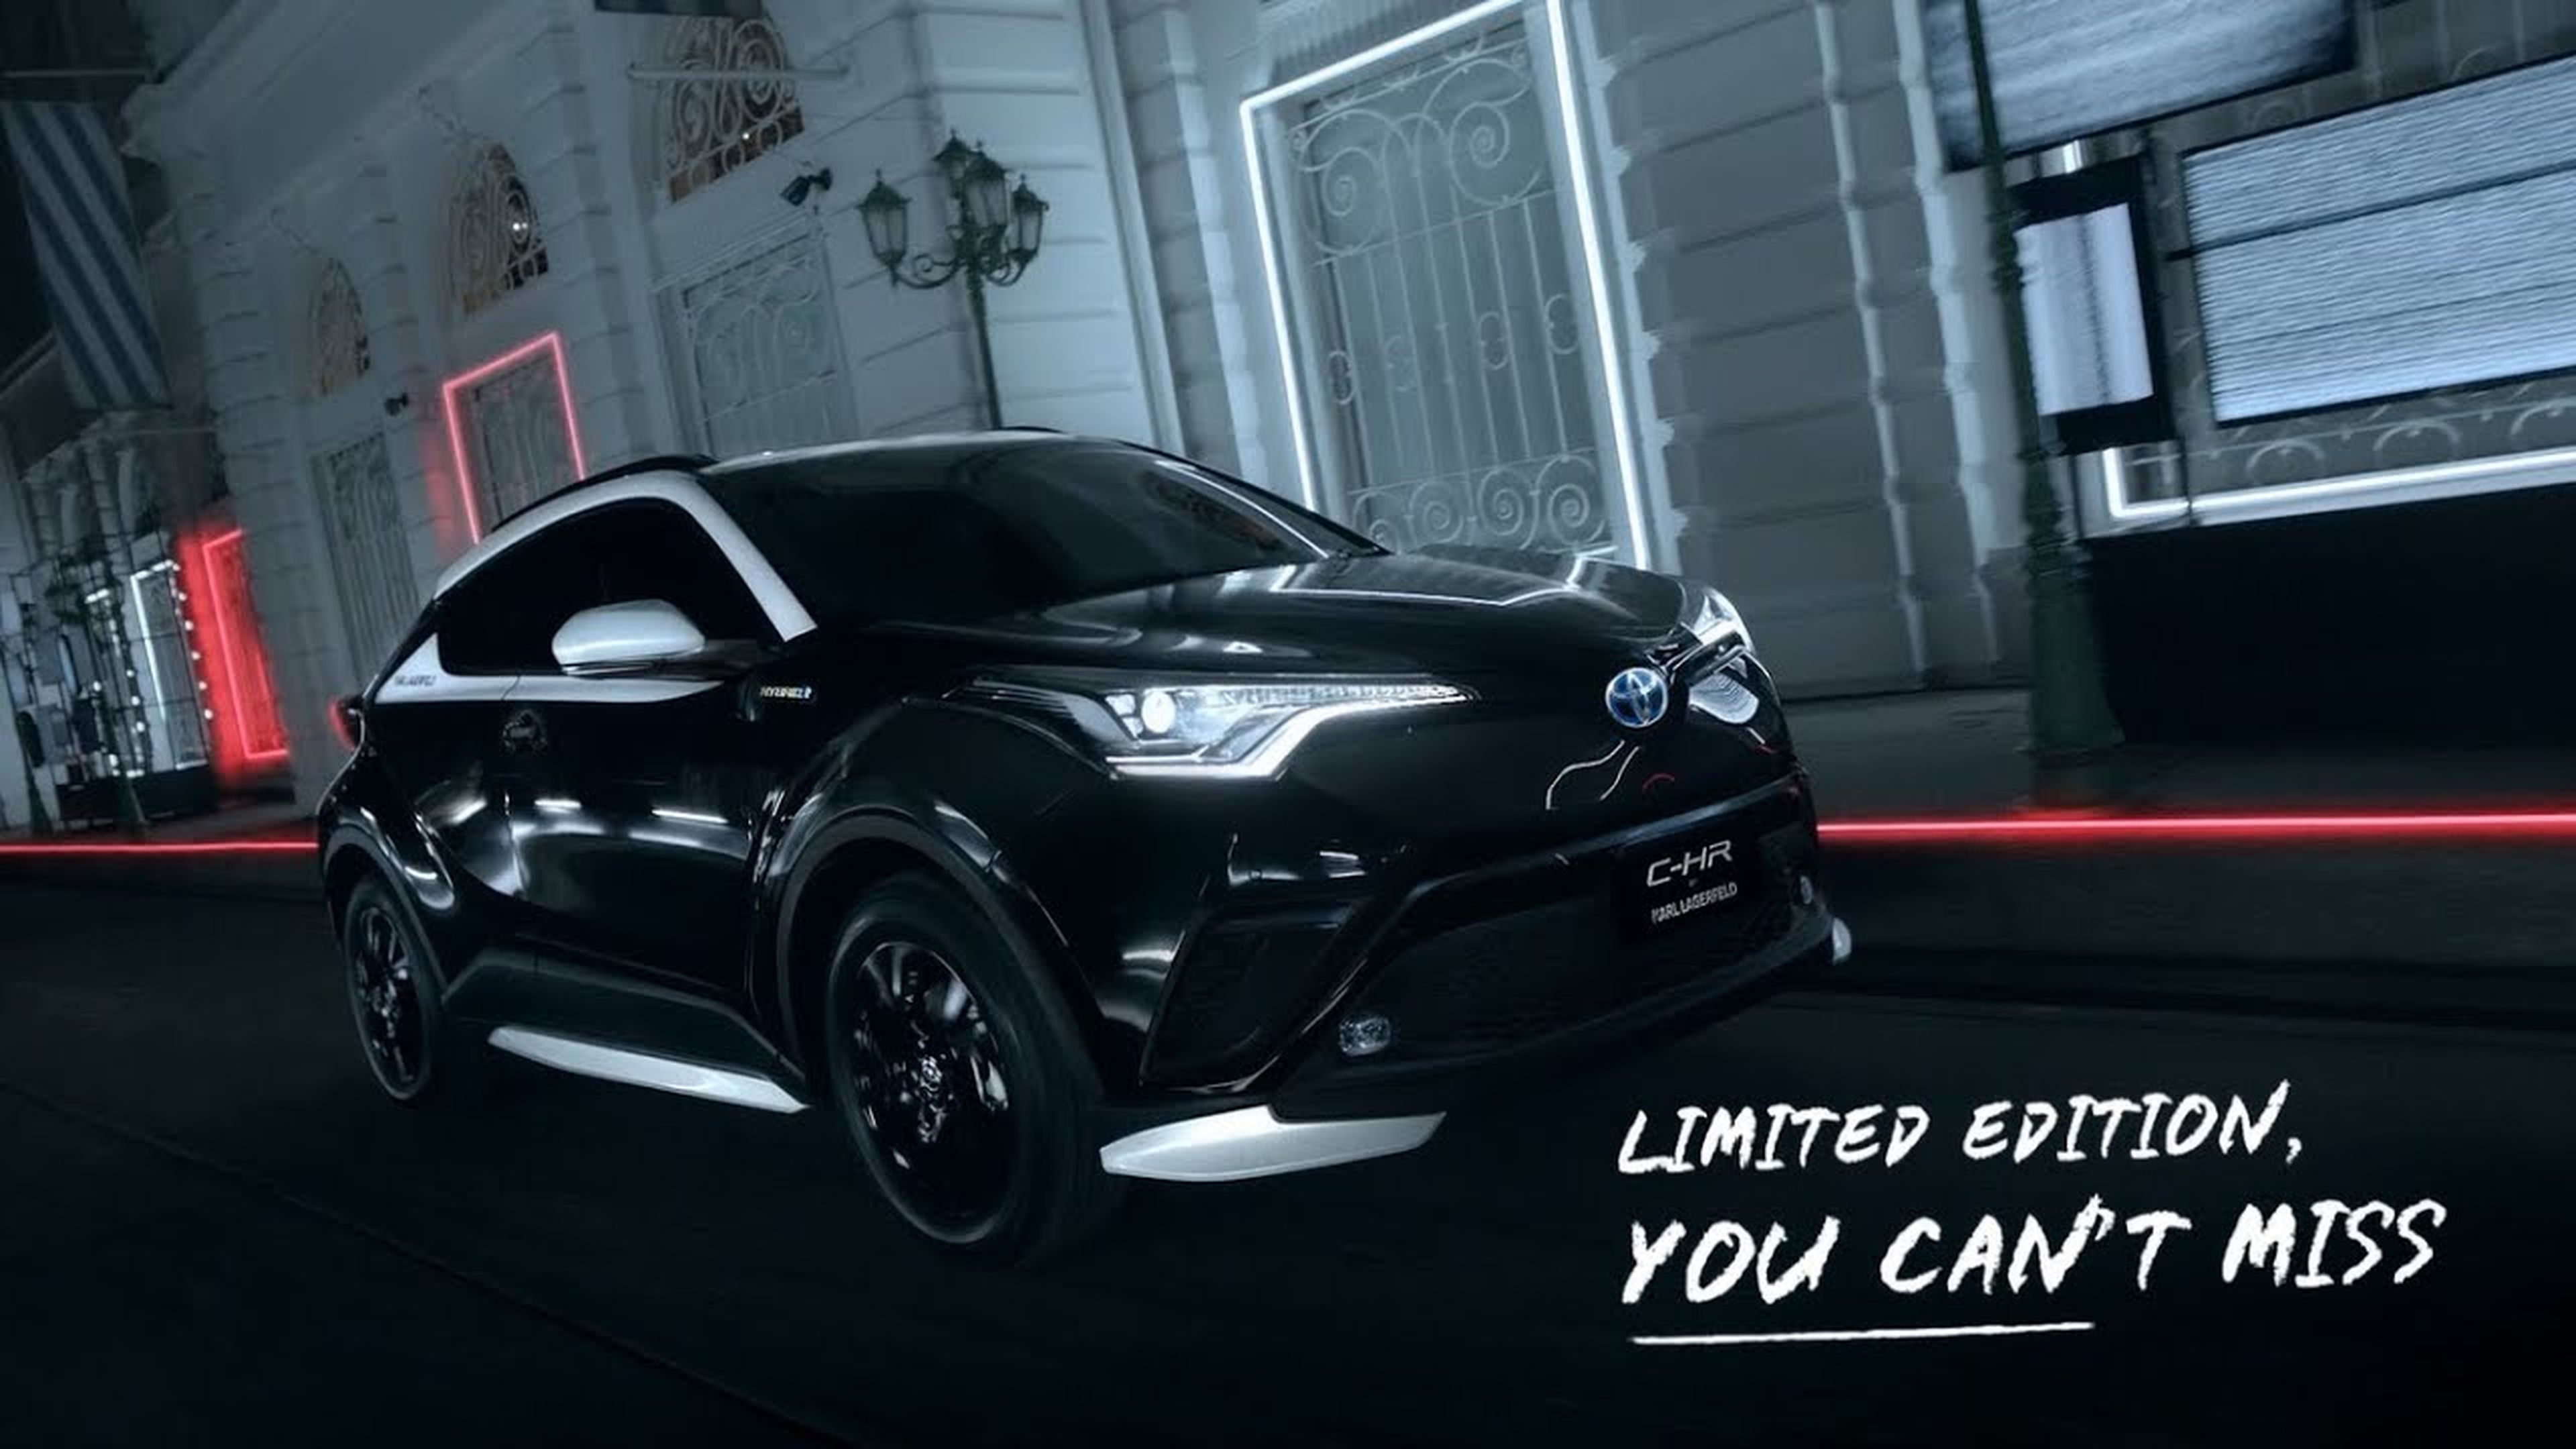 C-HR BY KARL LAGERFELD: PROMOTION